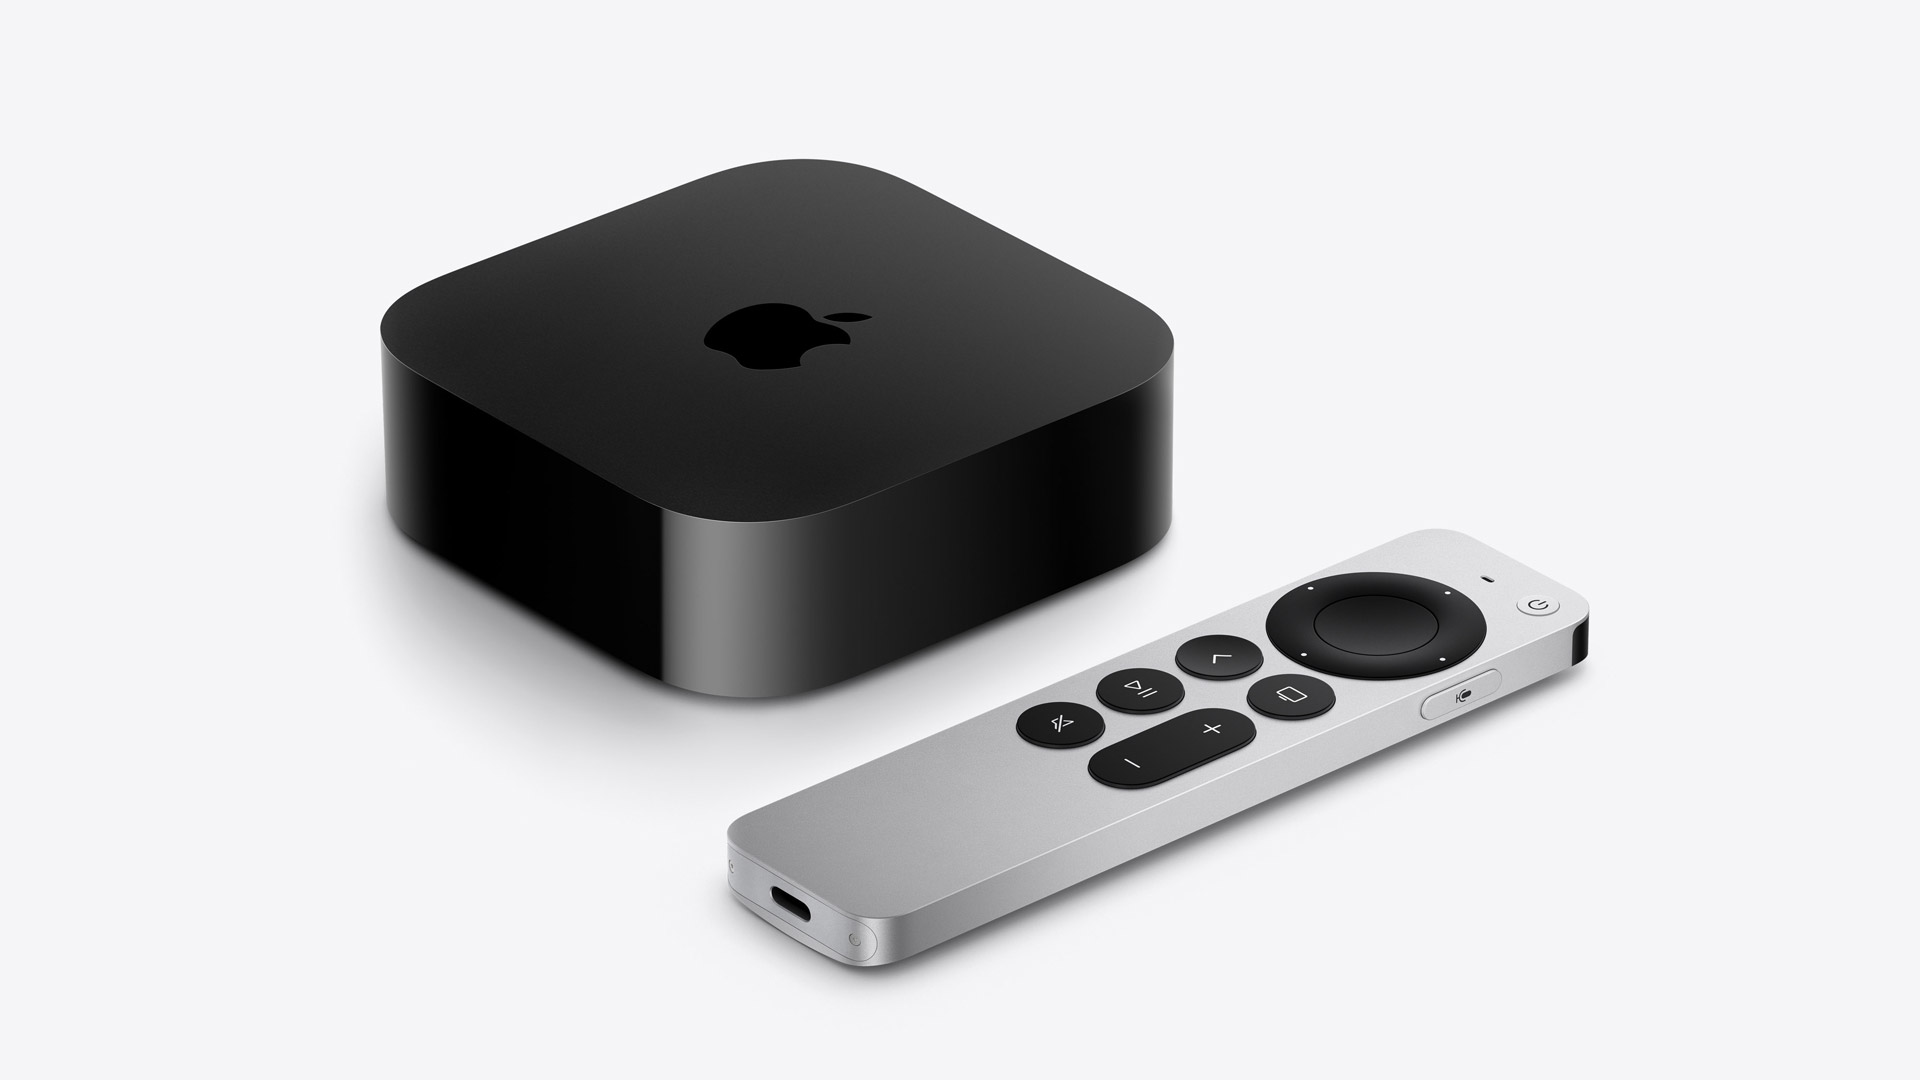 Pompeji Solformørkelse Montgomery New Apple TV 4K doesn't come with charging cable for Siri Remote